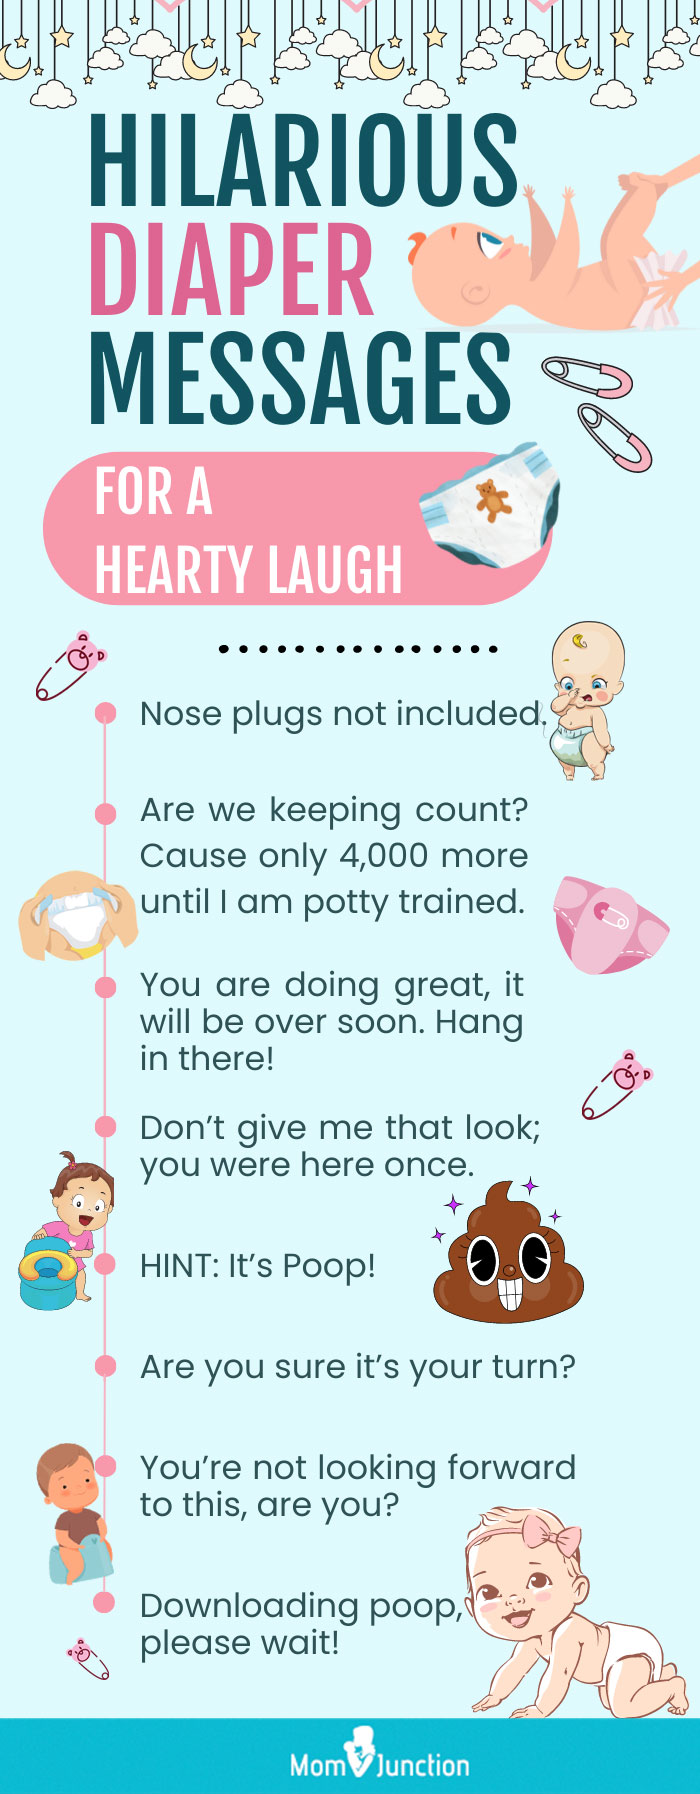 hilarious diaper messages for a hearty laugh [infographic]